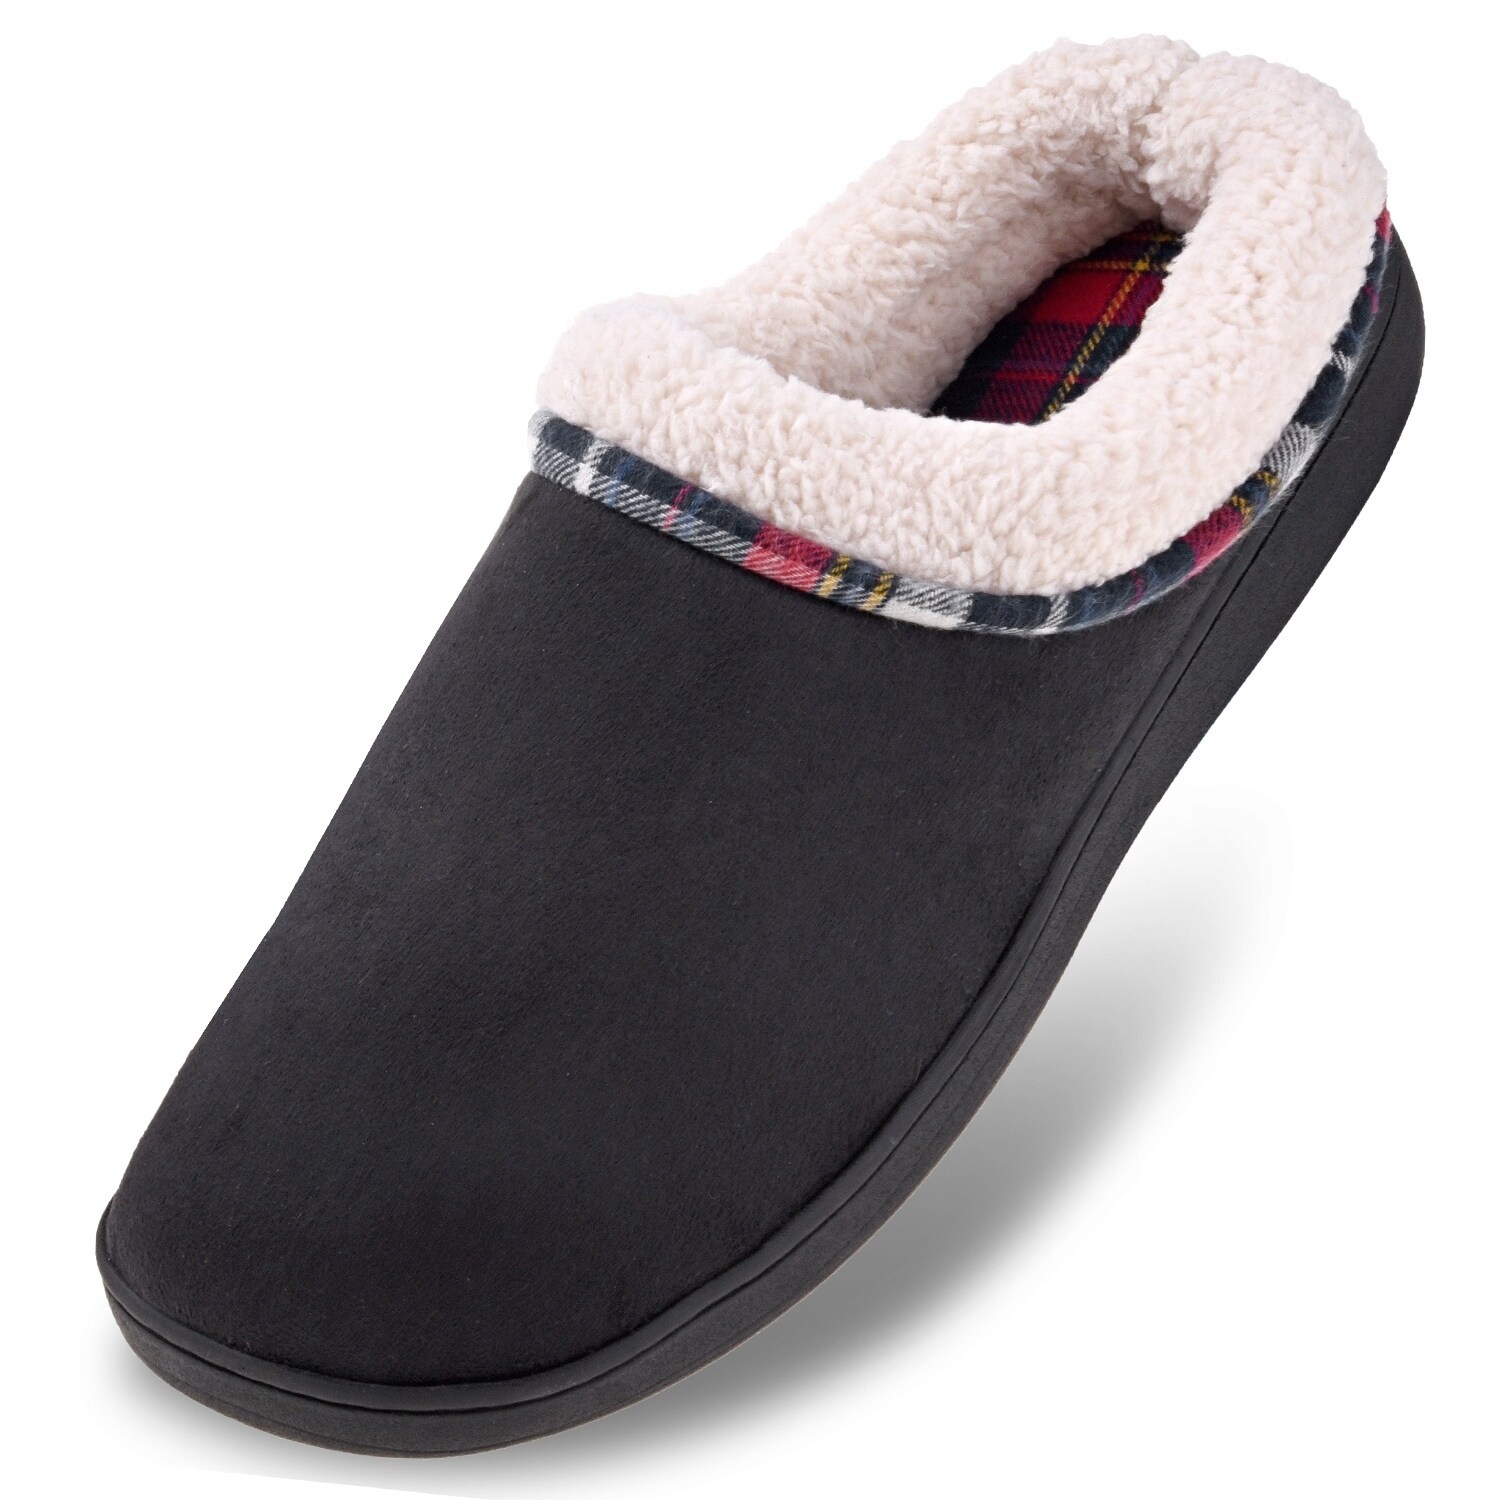 slip on house shoes